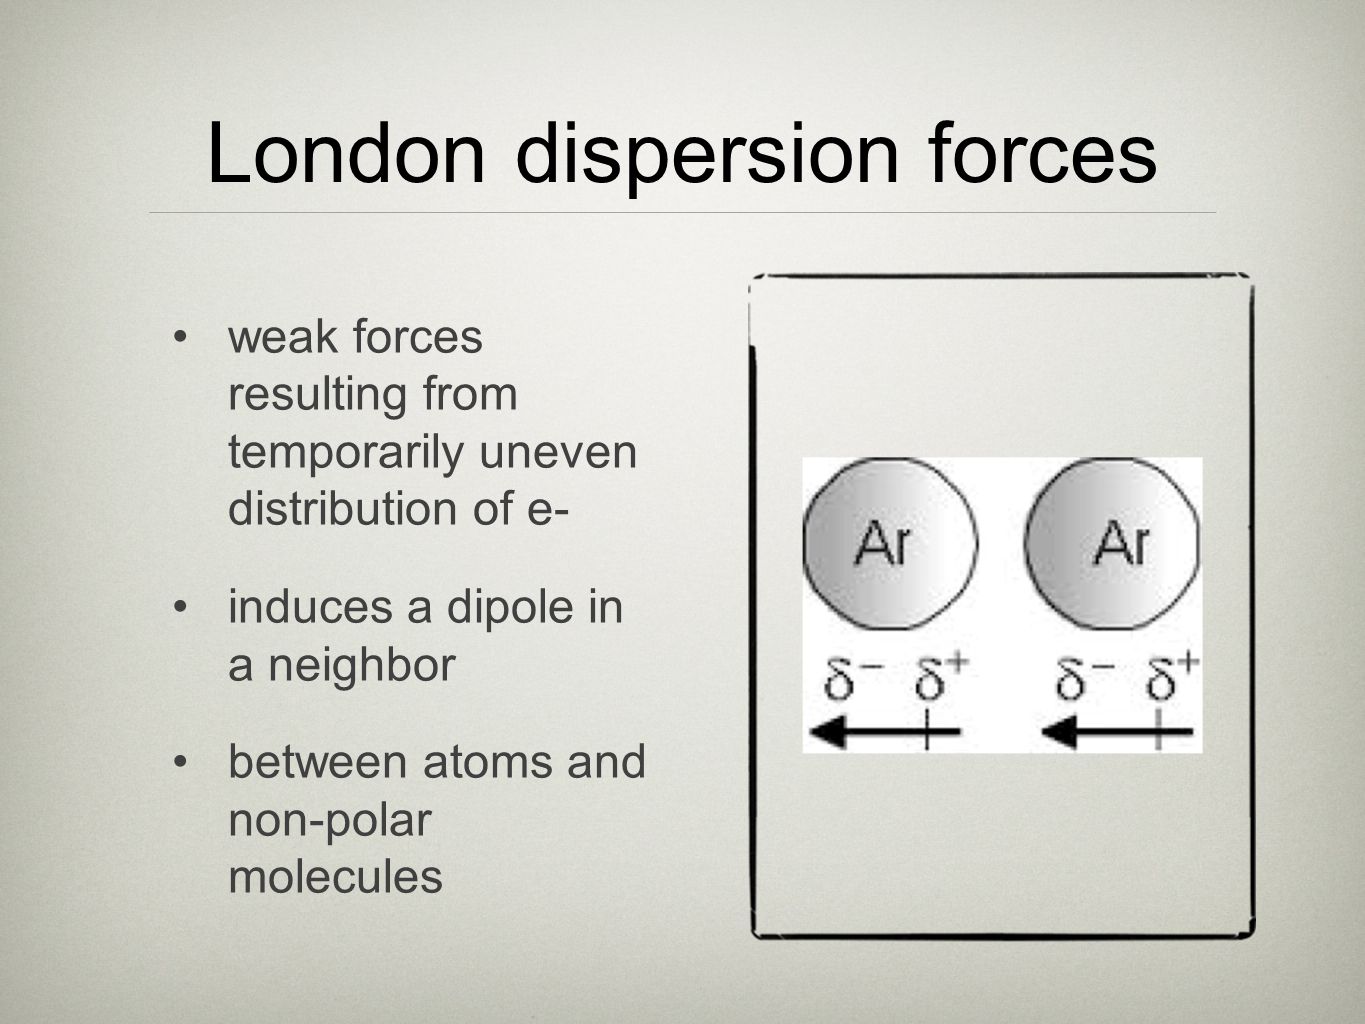 London dispersion forces weak forces resulting from temporarily uneven distribution of e- induces a dipole in a neighbor between atoms and non-polar molecules